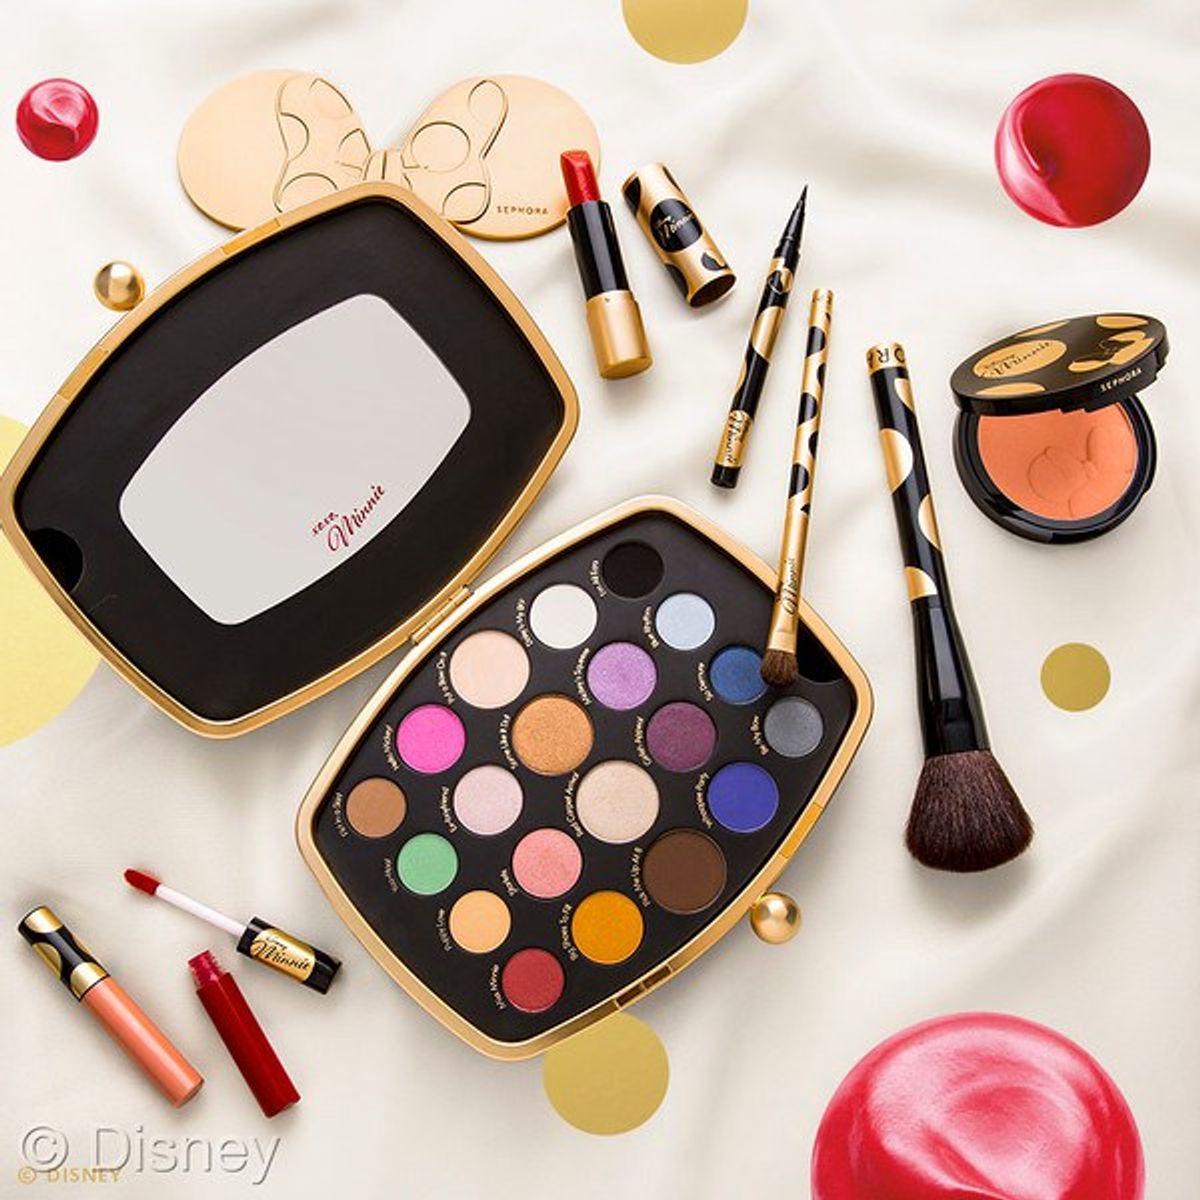 8 Reasons I Love Makeup Even Though I Don't Wear It 24/7